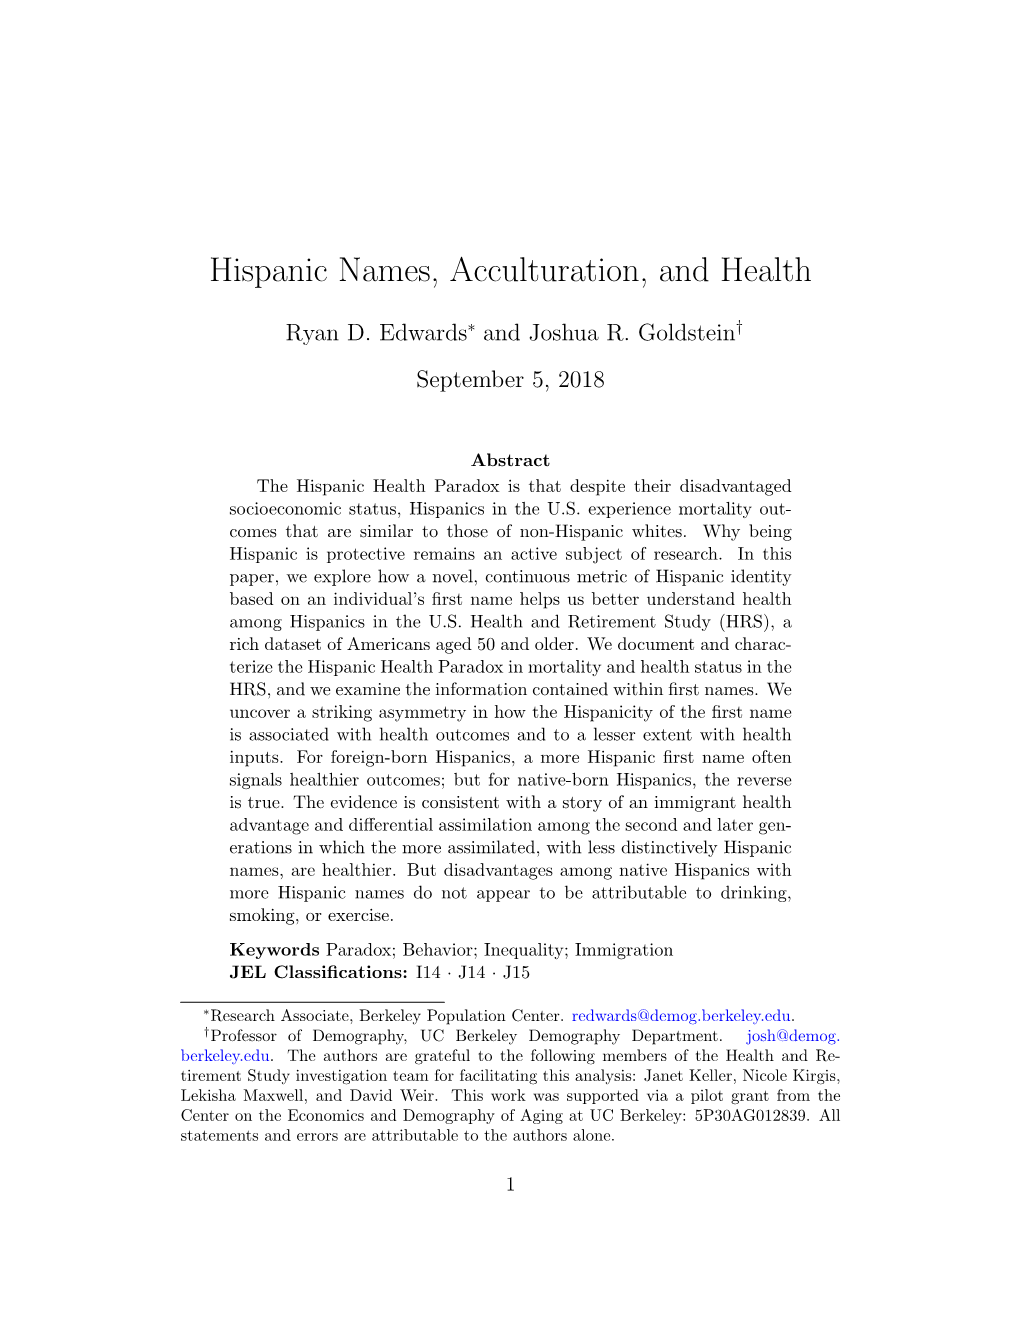 Hispanic Names, Acculturation, and Health